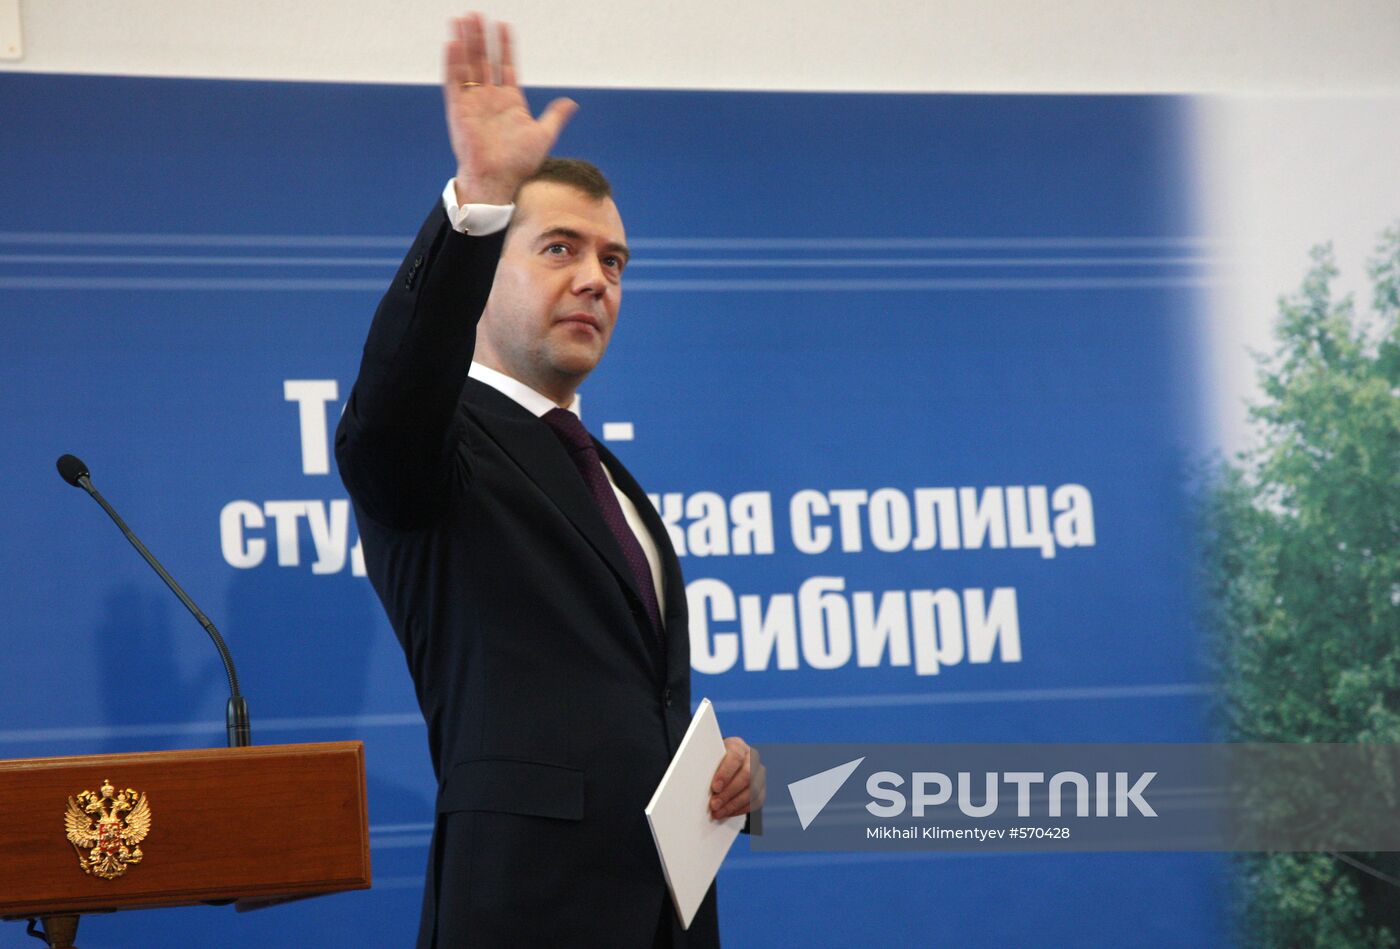 Dmitry Medvedev meets with Tomsk students